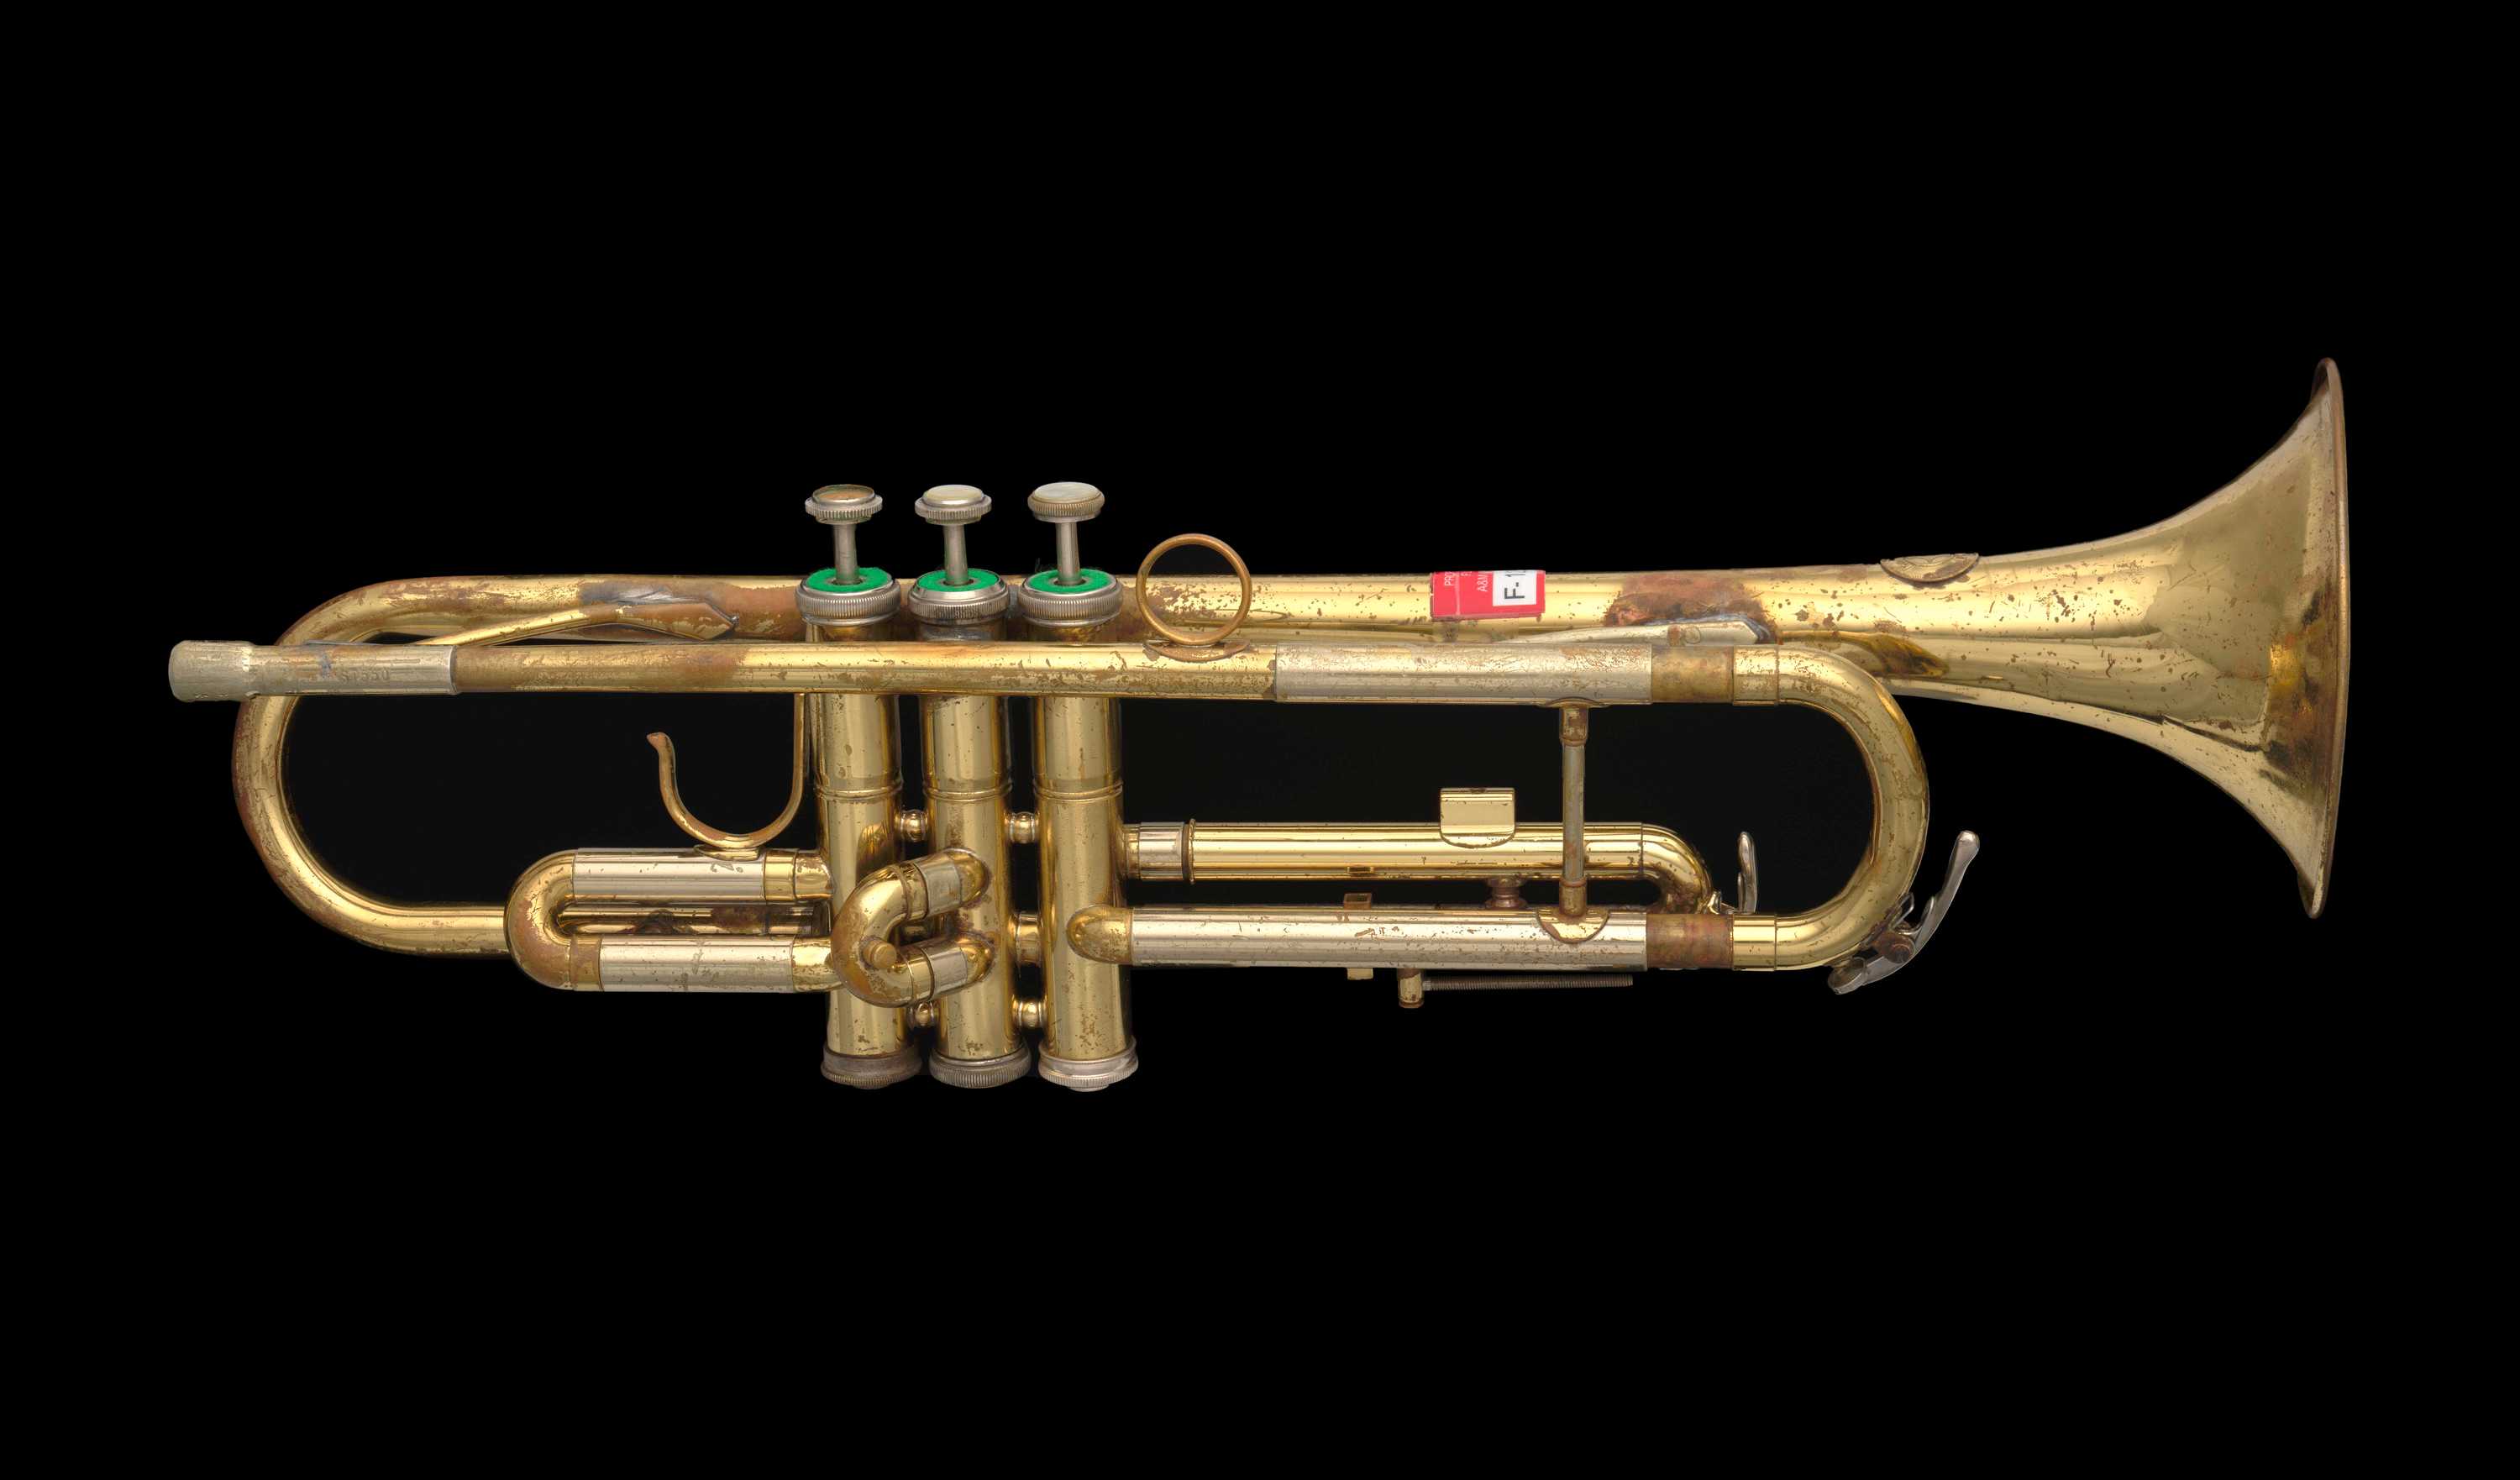 A Holton B-flat trumpet used by the Florida A&M University Marching Band.